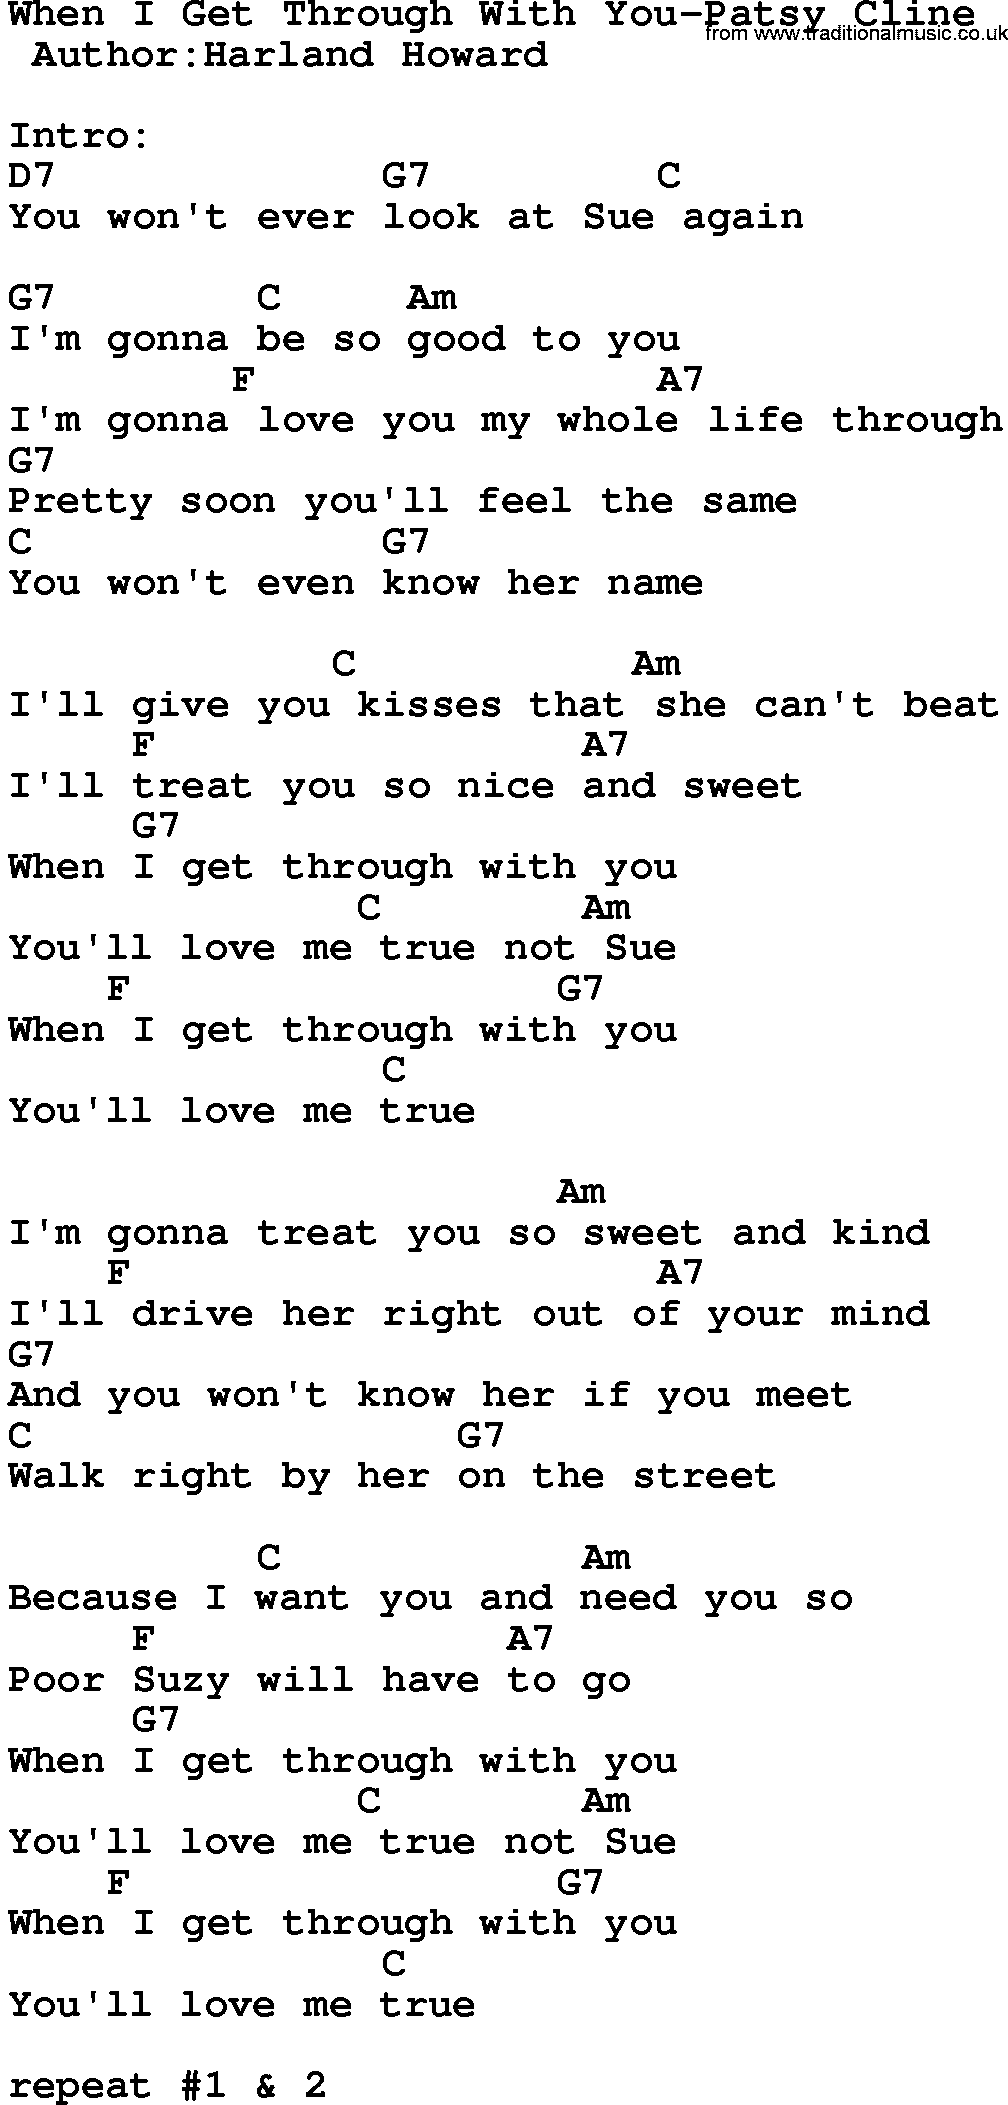 Country music song: When I Get Through With You-Patsy Cline lyrics and chords